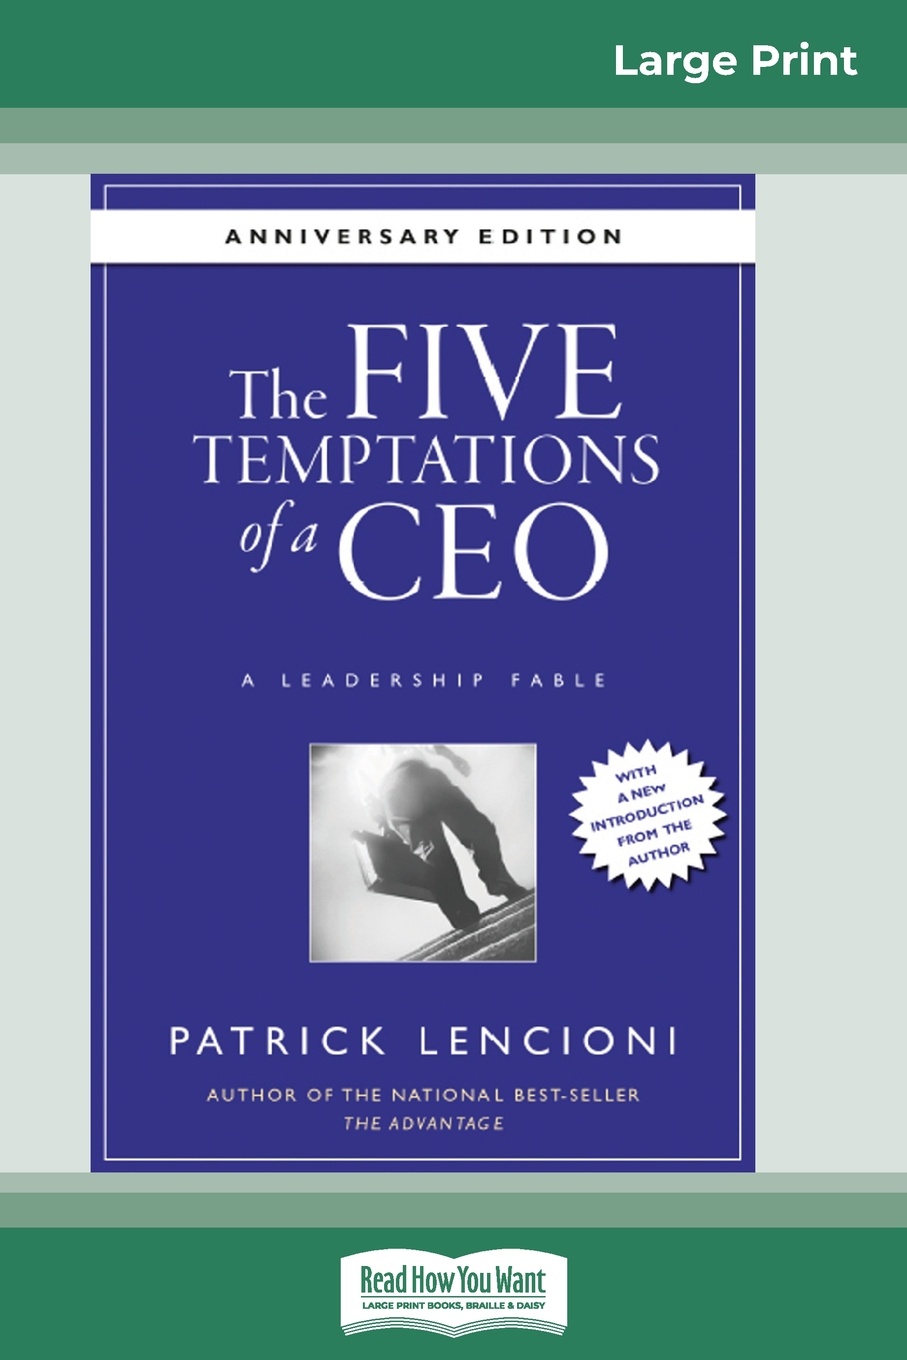 The Five Temptations of a CEO. A Leadership Fable, 10th Anniversary Edition (16pt Large Print Edition)